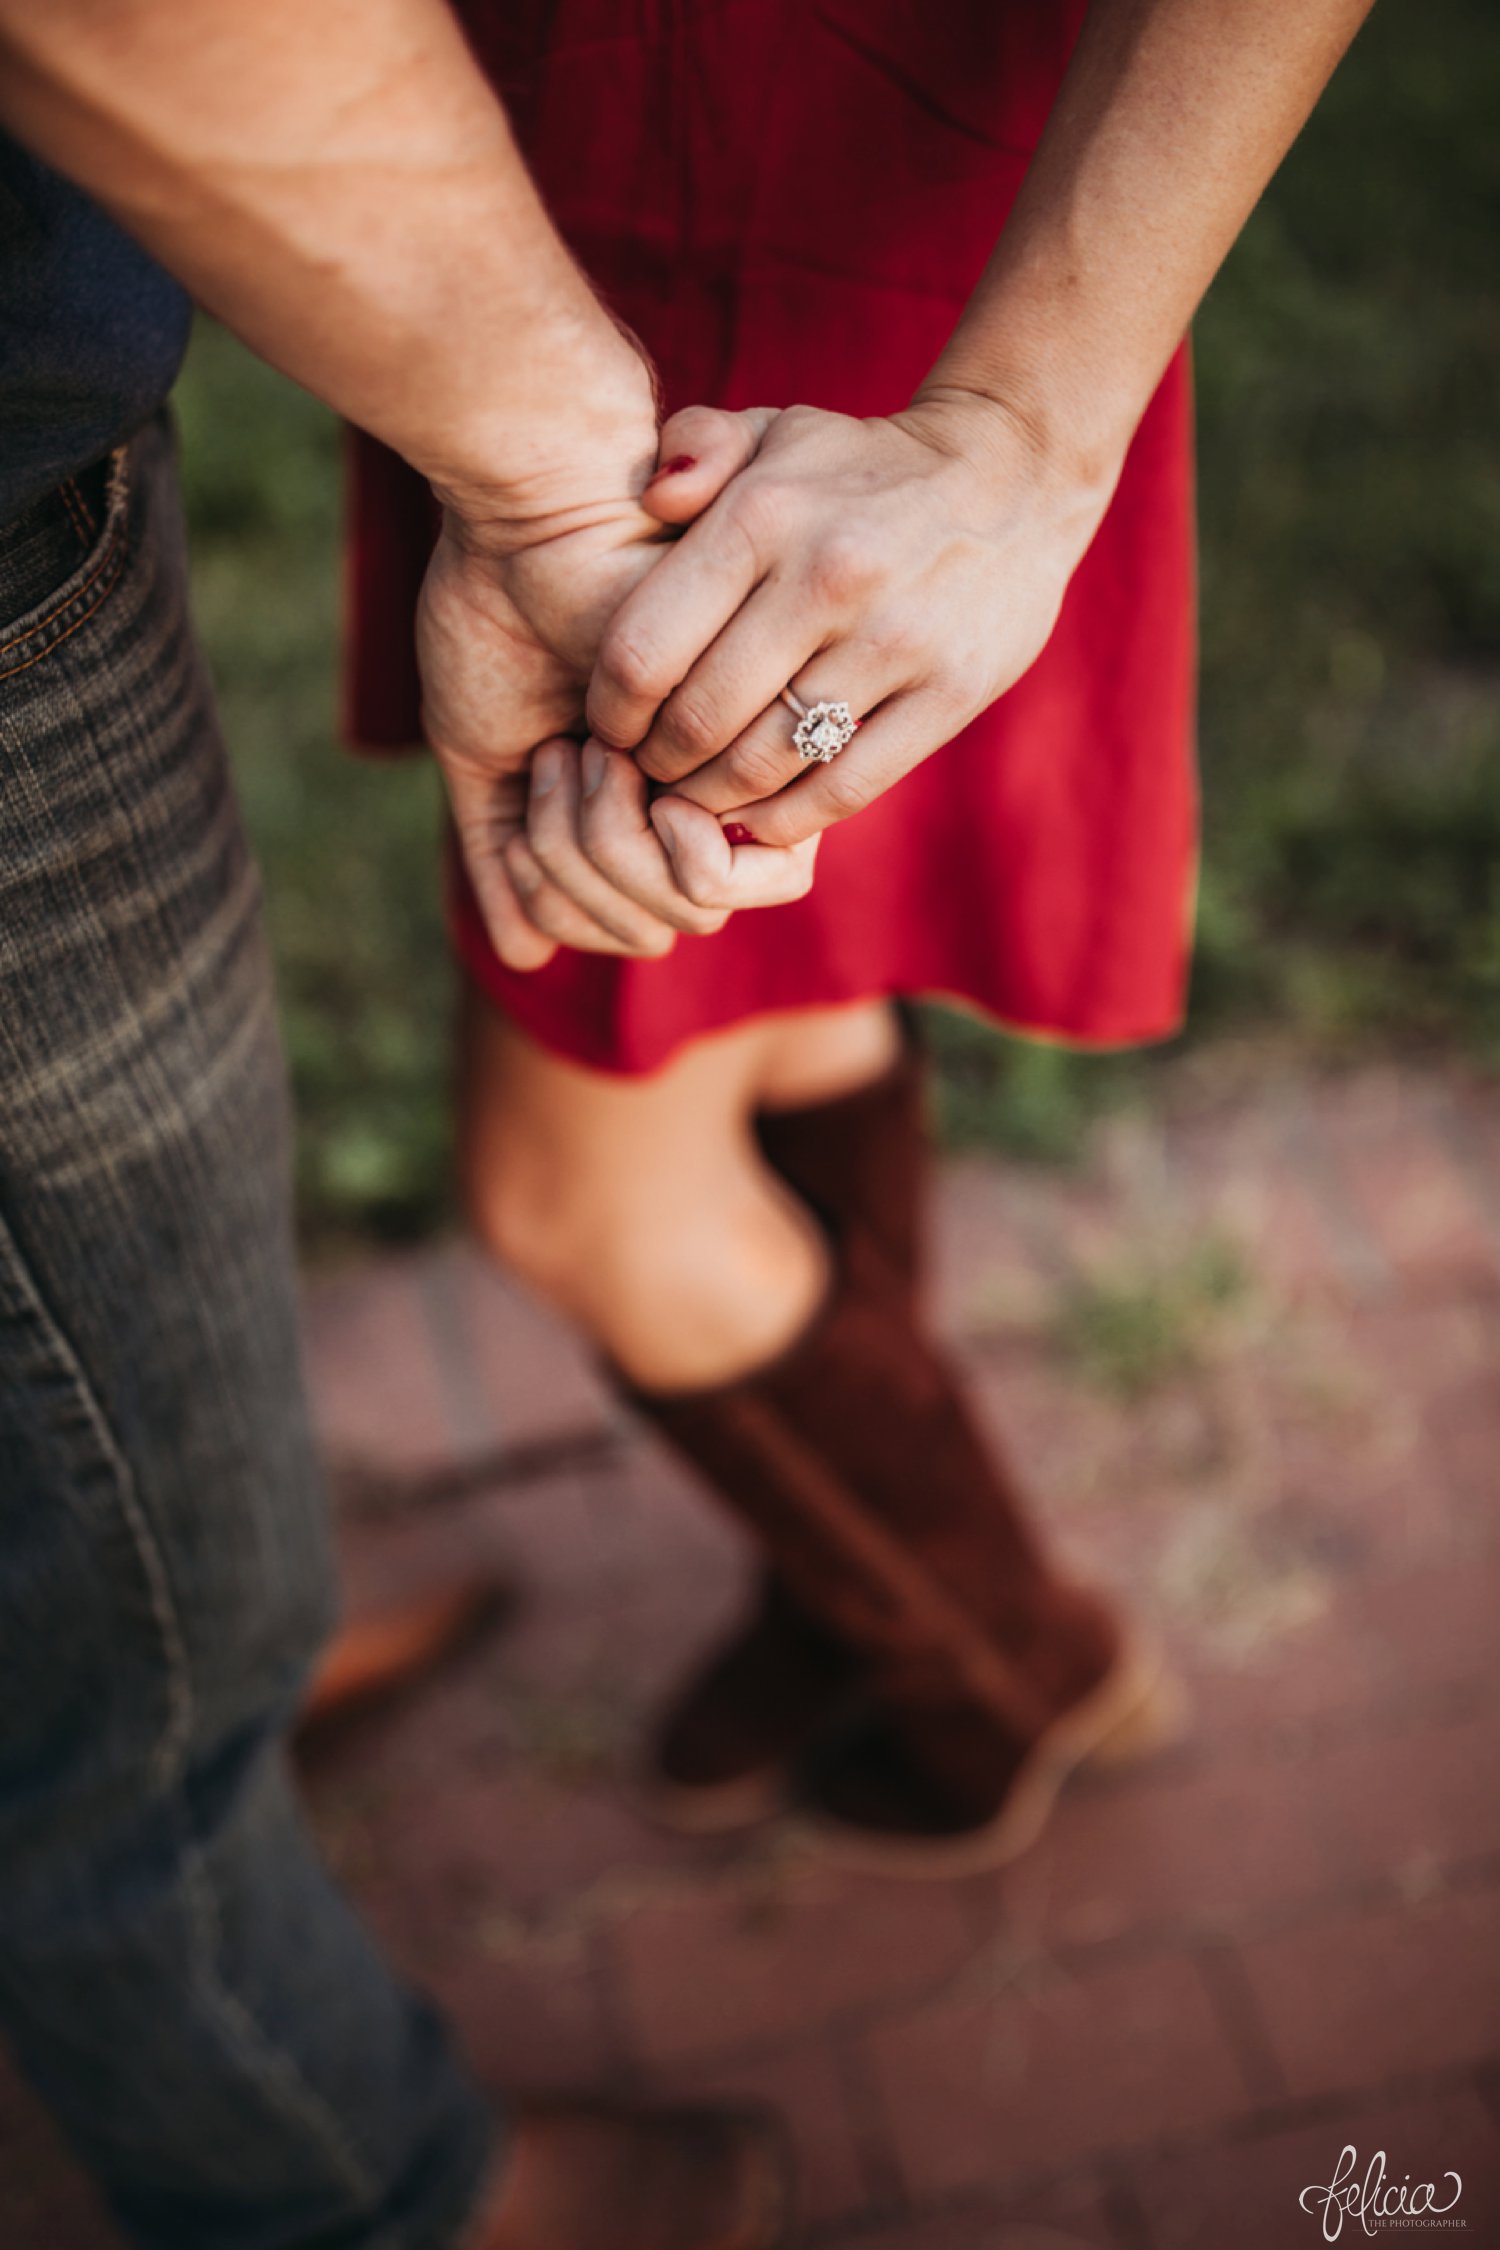 images by feliciathephotographer.com | destination wedding photographer | engagement | farmhouse | country | kansas city | sweet southern | red dress | nordstrom rack | unique halo diamond ring | casual | brown boots | amazon | cowboy | 